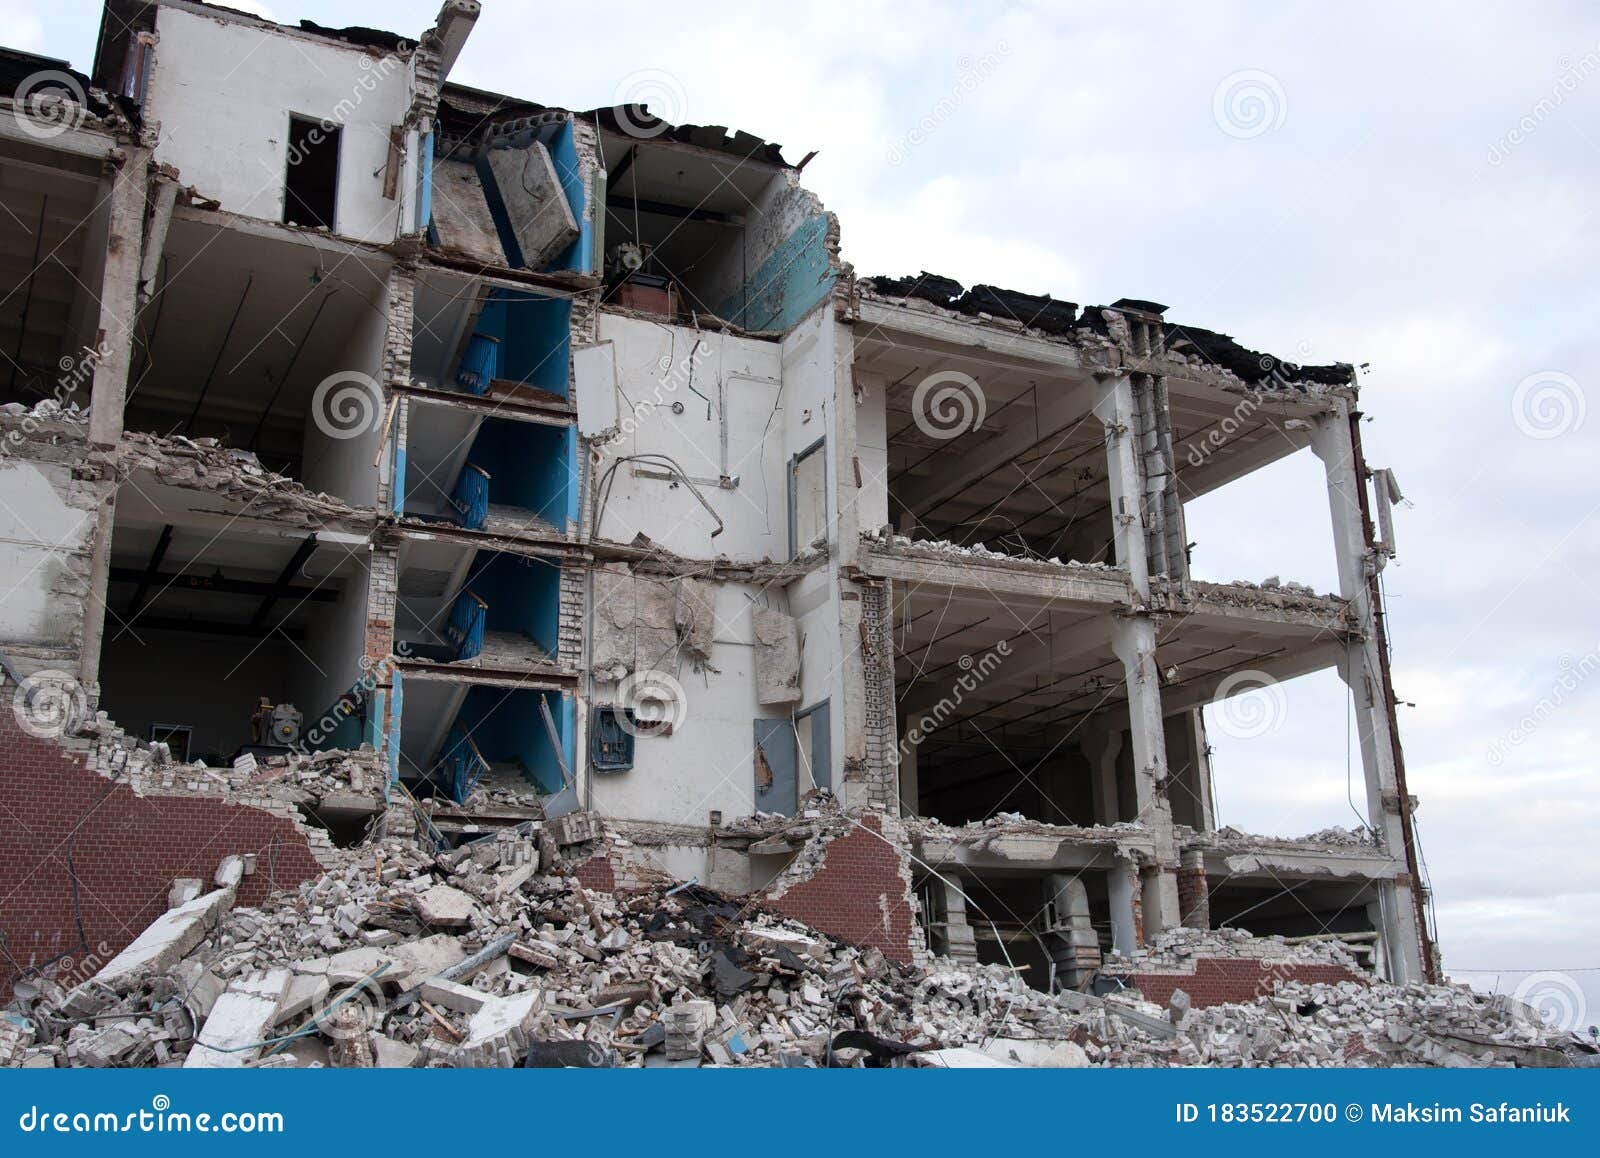 View Of The Demolition Of A Multi Storey Building Dismantling And Demolition Of Buildings And